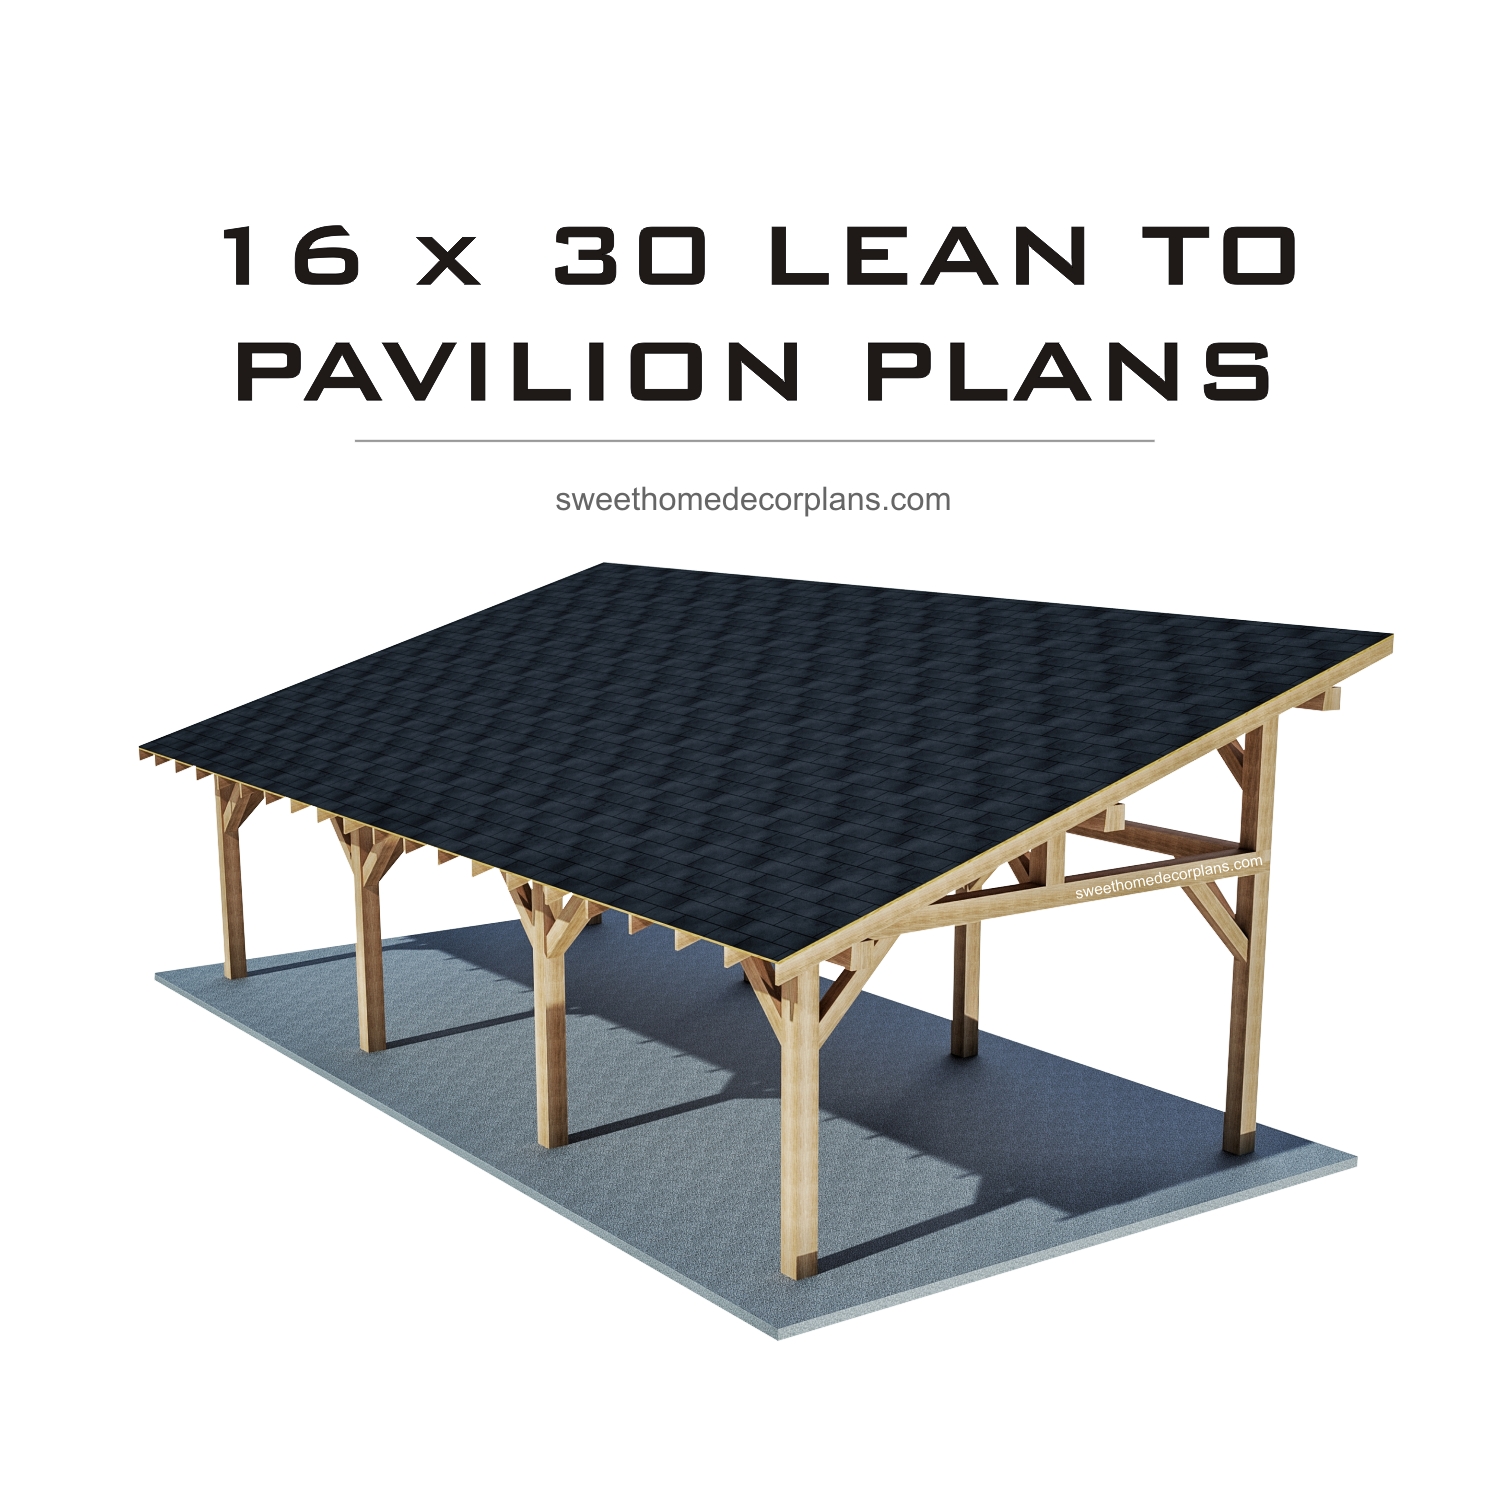 wooden-16-x-30-lean-to-pavilion-plans-in-pdf-for-outdoor